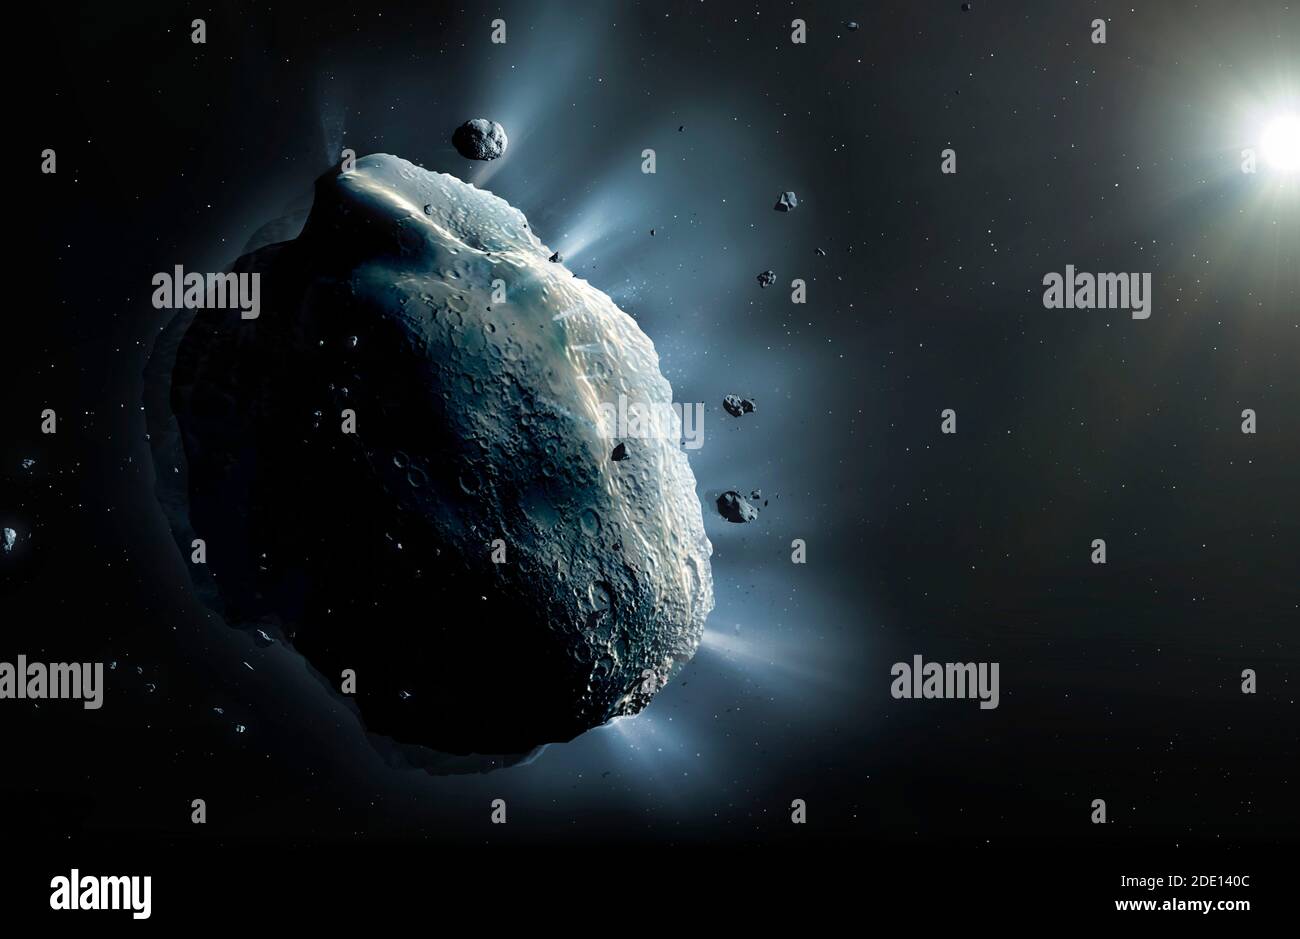 largest asteroid in solar system